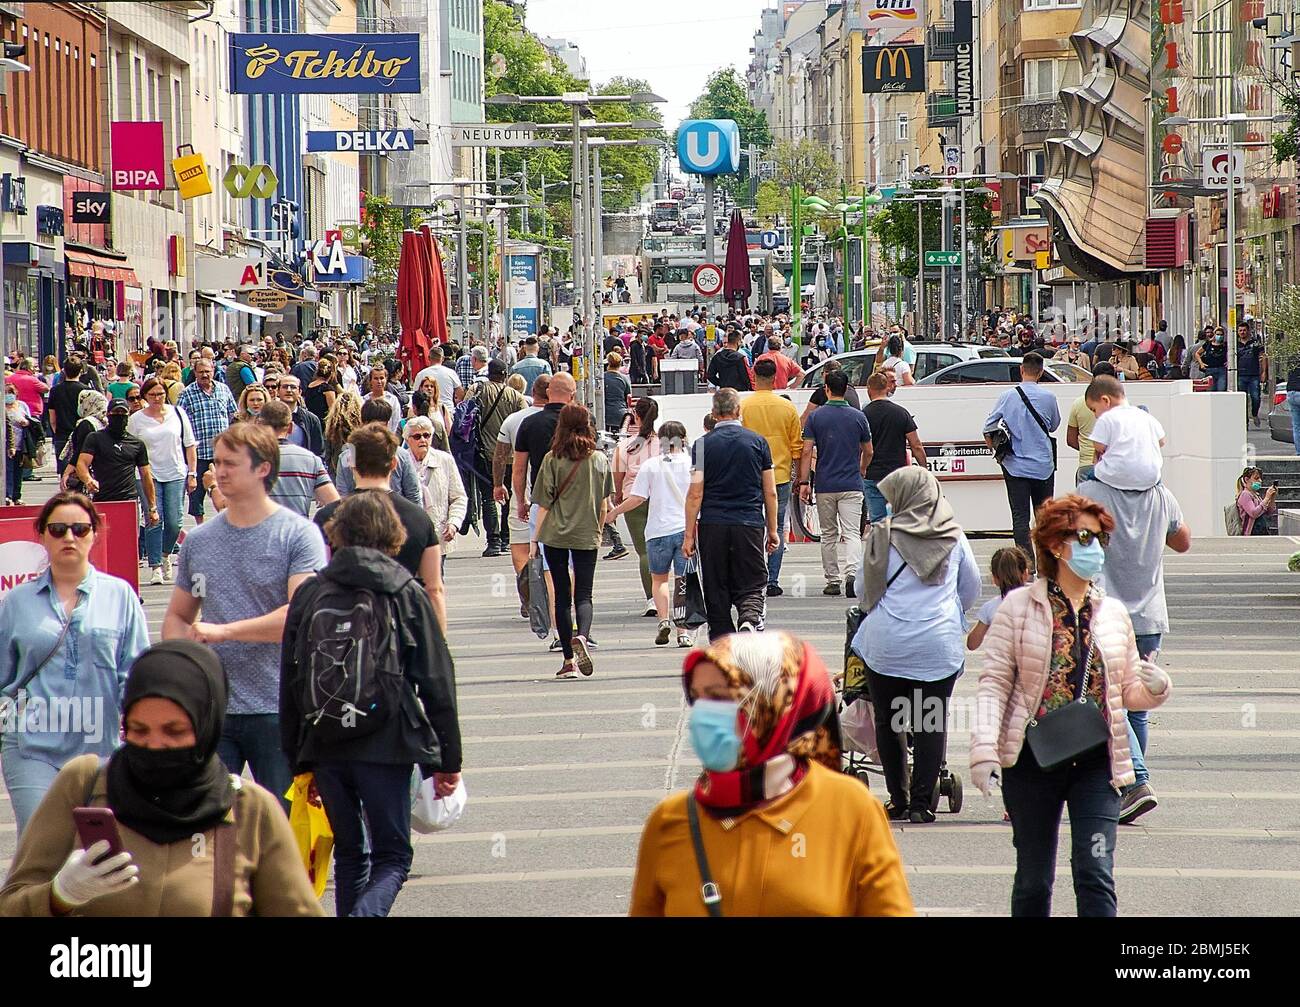 Vienna, Austria. 9th May, 2020. People are seen on a shopping street in Vienna, Austria, on May 9, 2020. Austria has gradually eased its restrictions after a nearly two-month lockdown to fight the coronavirus. So far, all shop have reopened with the measures that keeping a safe distance, wearing masks and so on while shopping. Credit: Georges Schneider/Xinhua/Alamy Live News Stock Photo